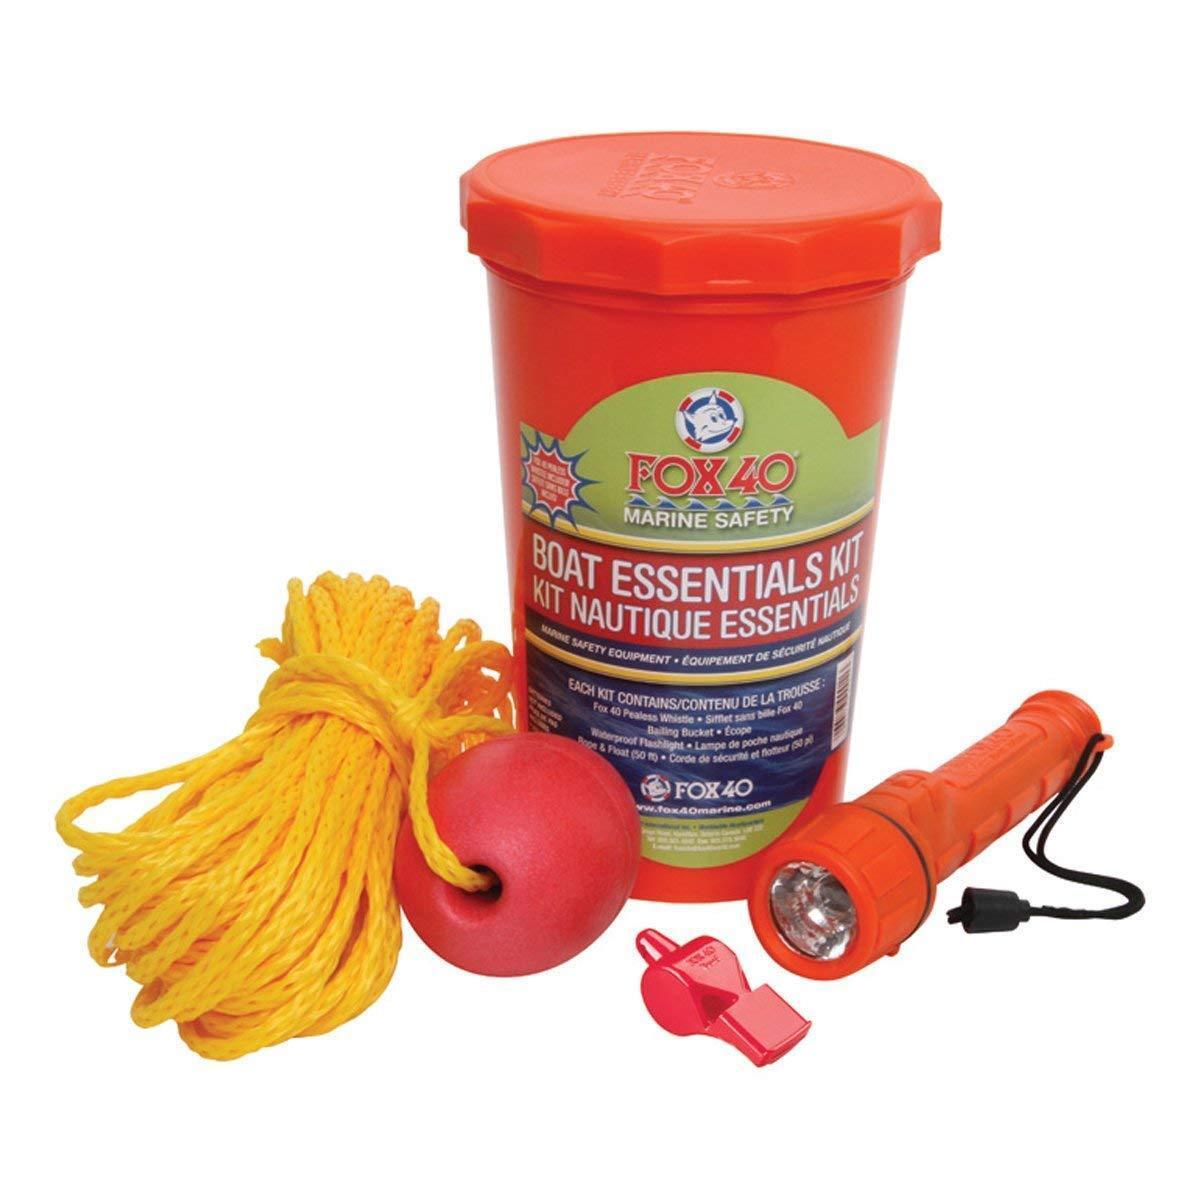 Primary image for Fox 40 Boat Essentials Kit | Outdoor Marine Safety Equipment | BEST VALUE!